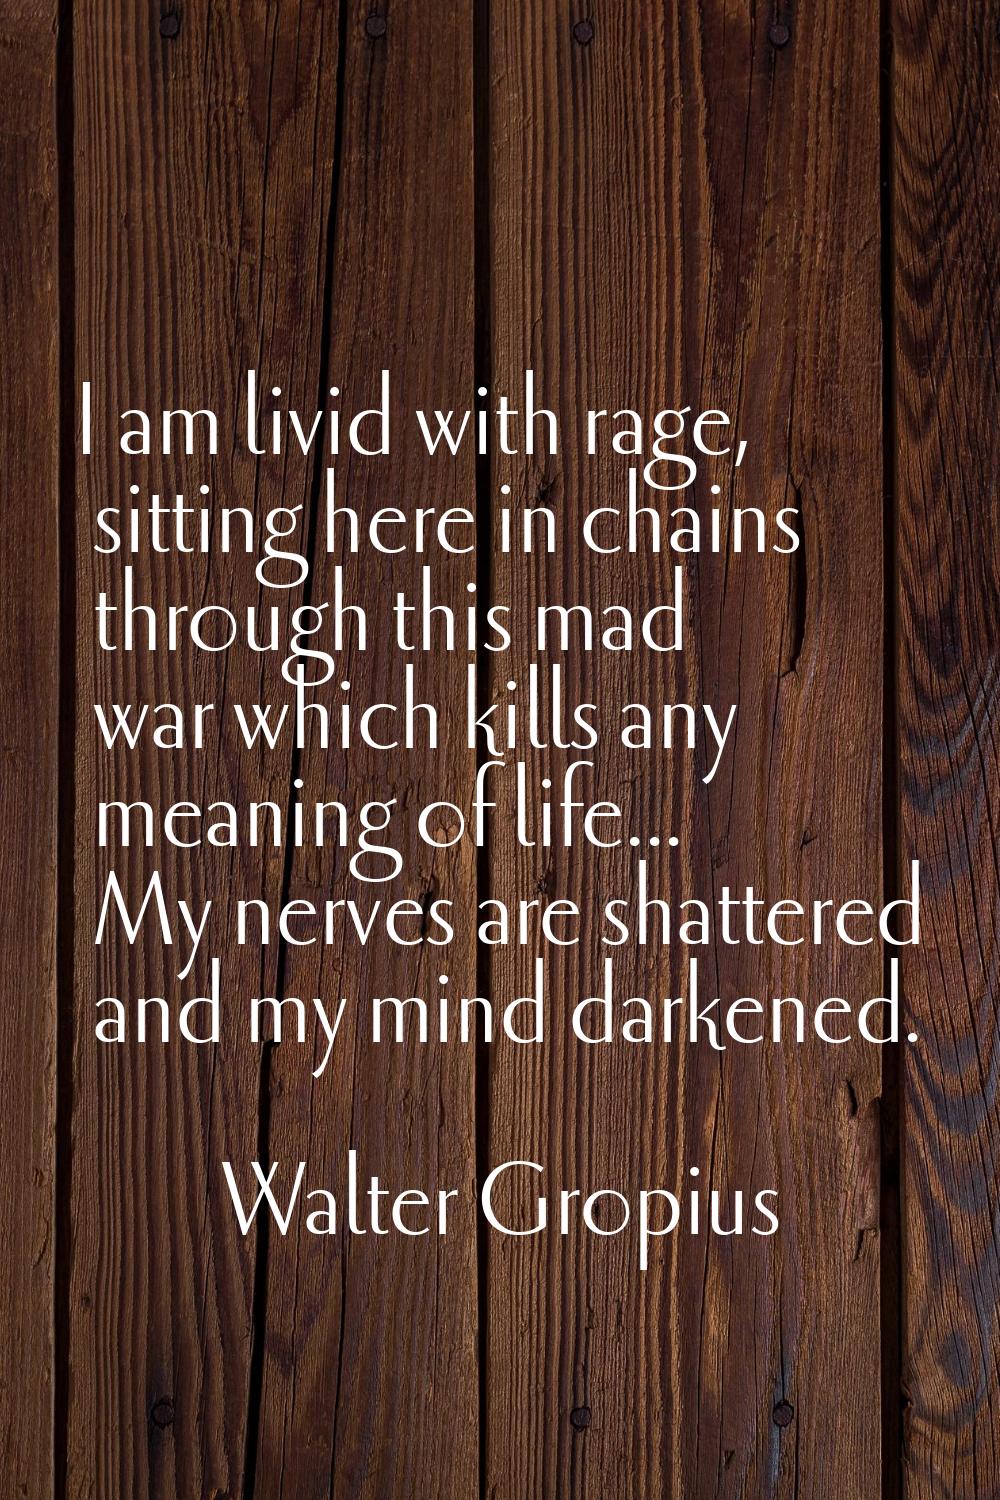 I am livid with rage, sitting here in chains through this mad war which kills any meaning of life..